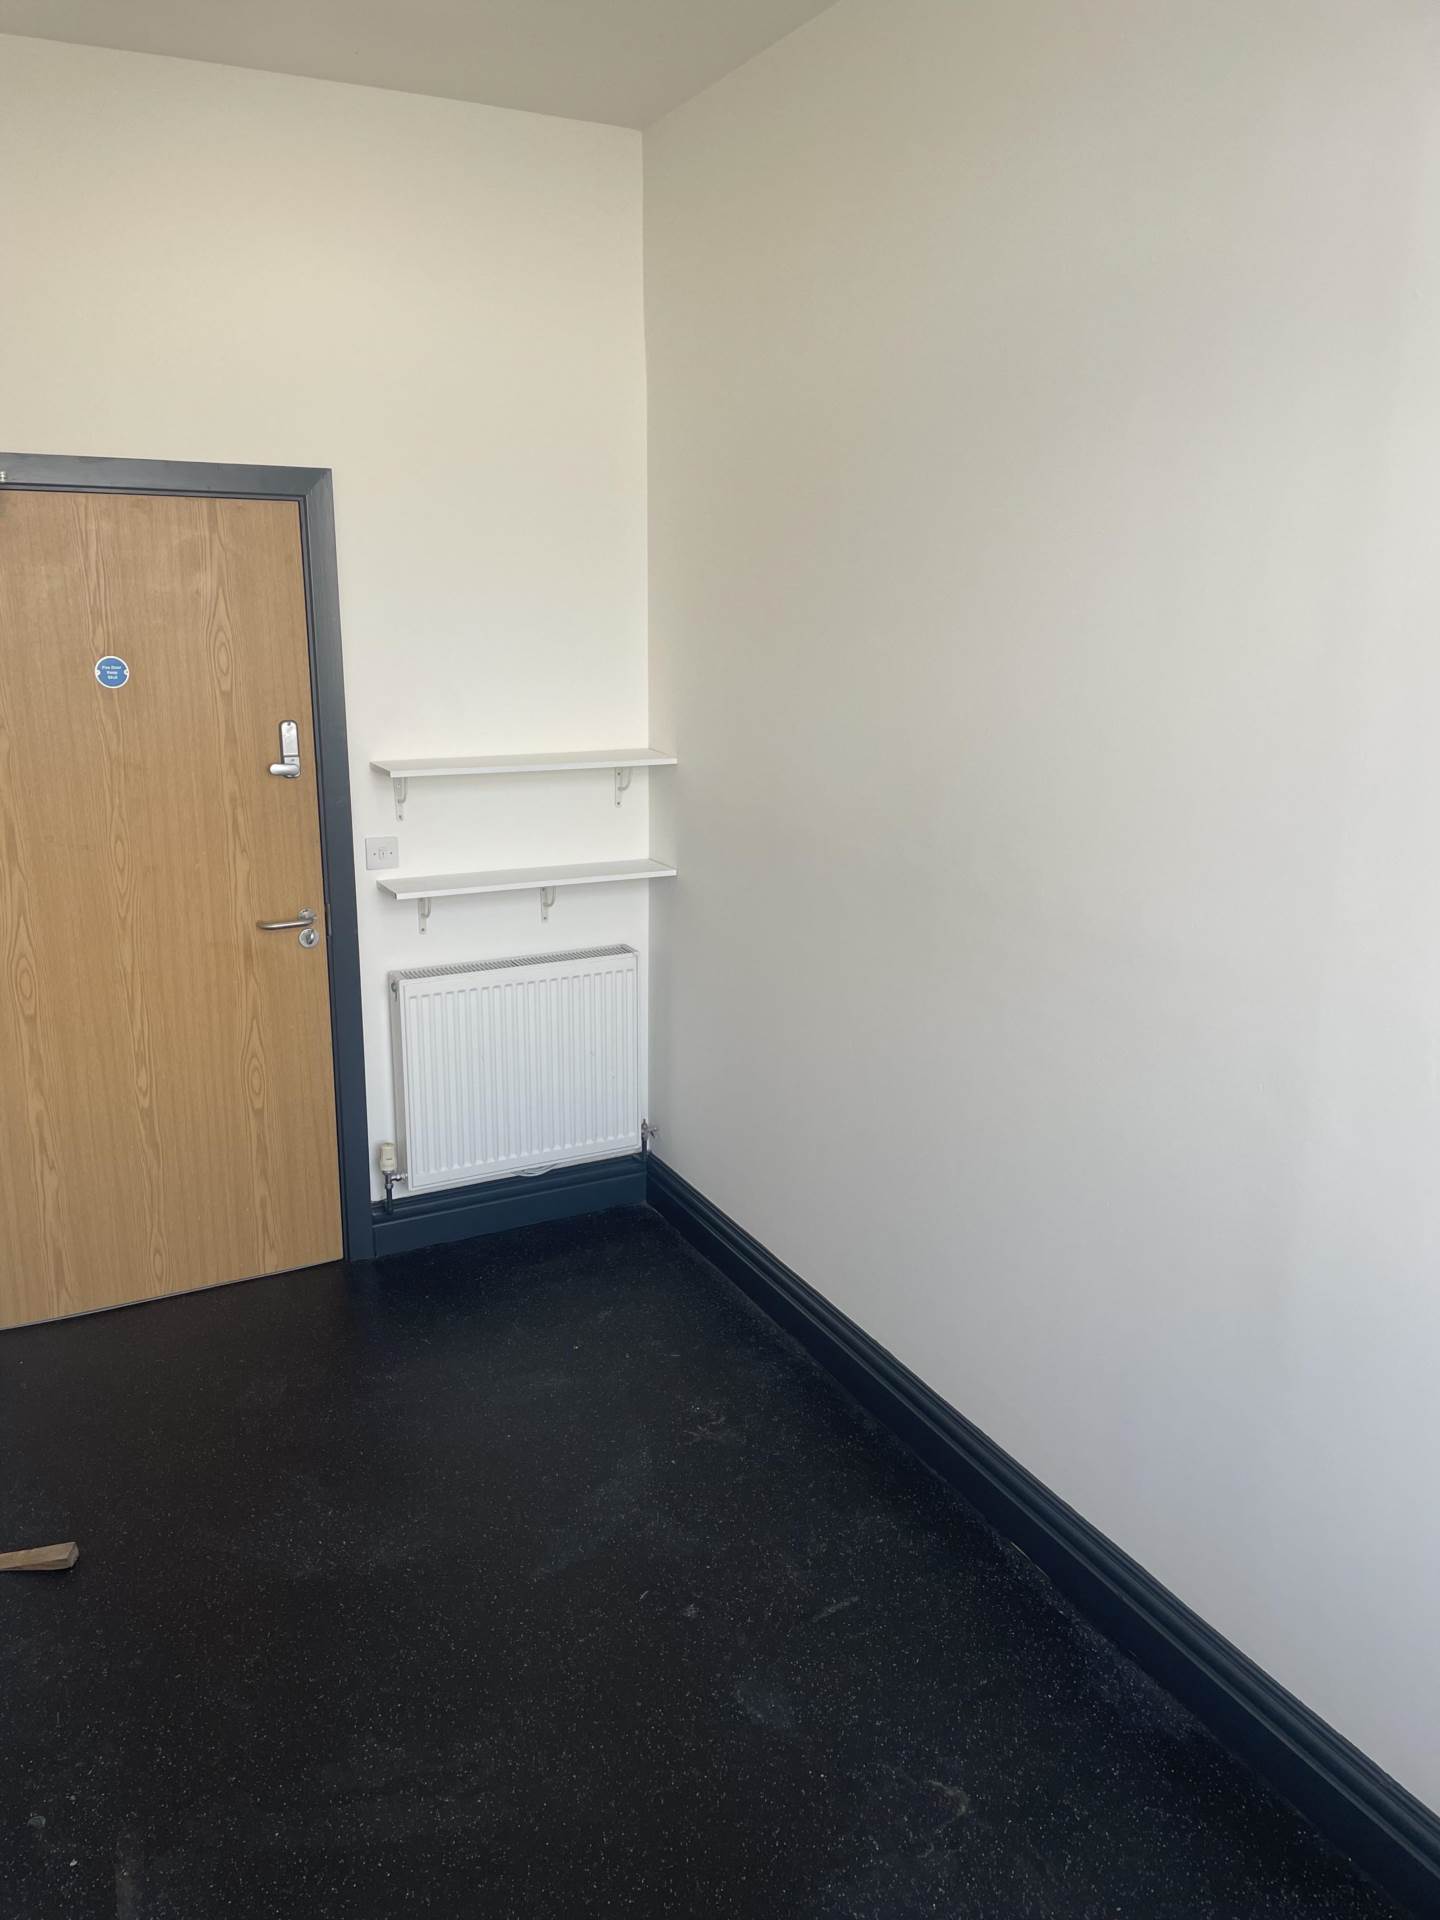 0 bed Office for rent in Warrington. From HLGB - Warrington